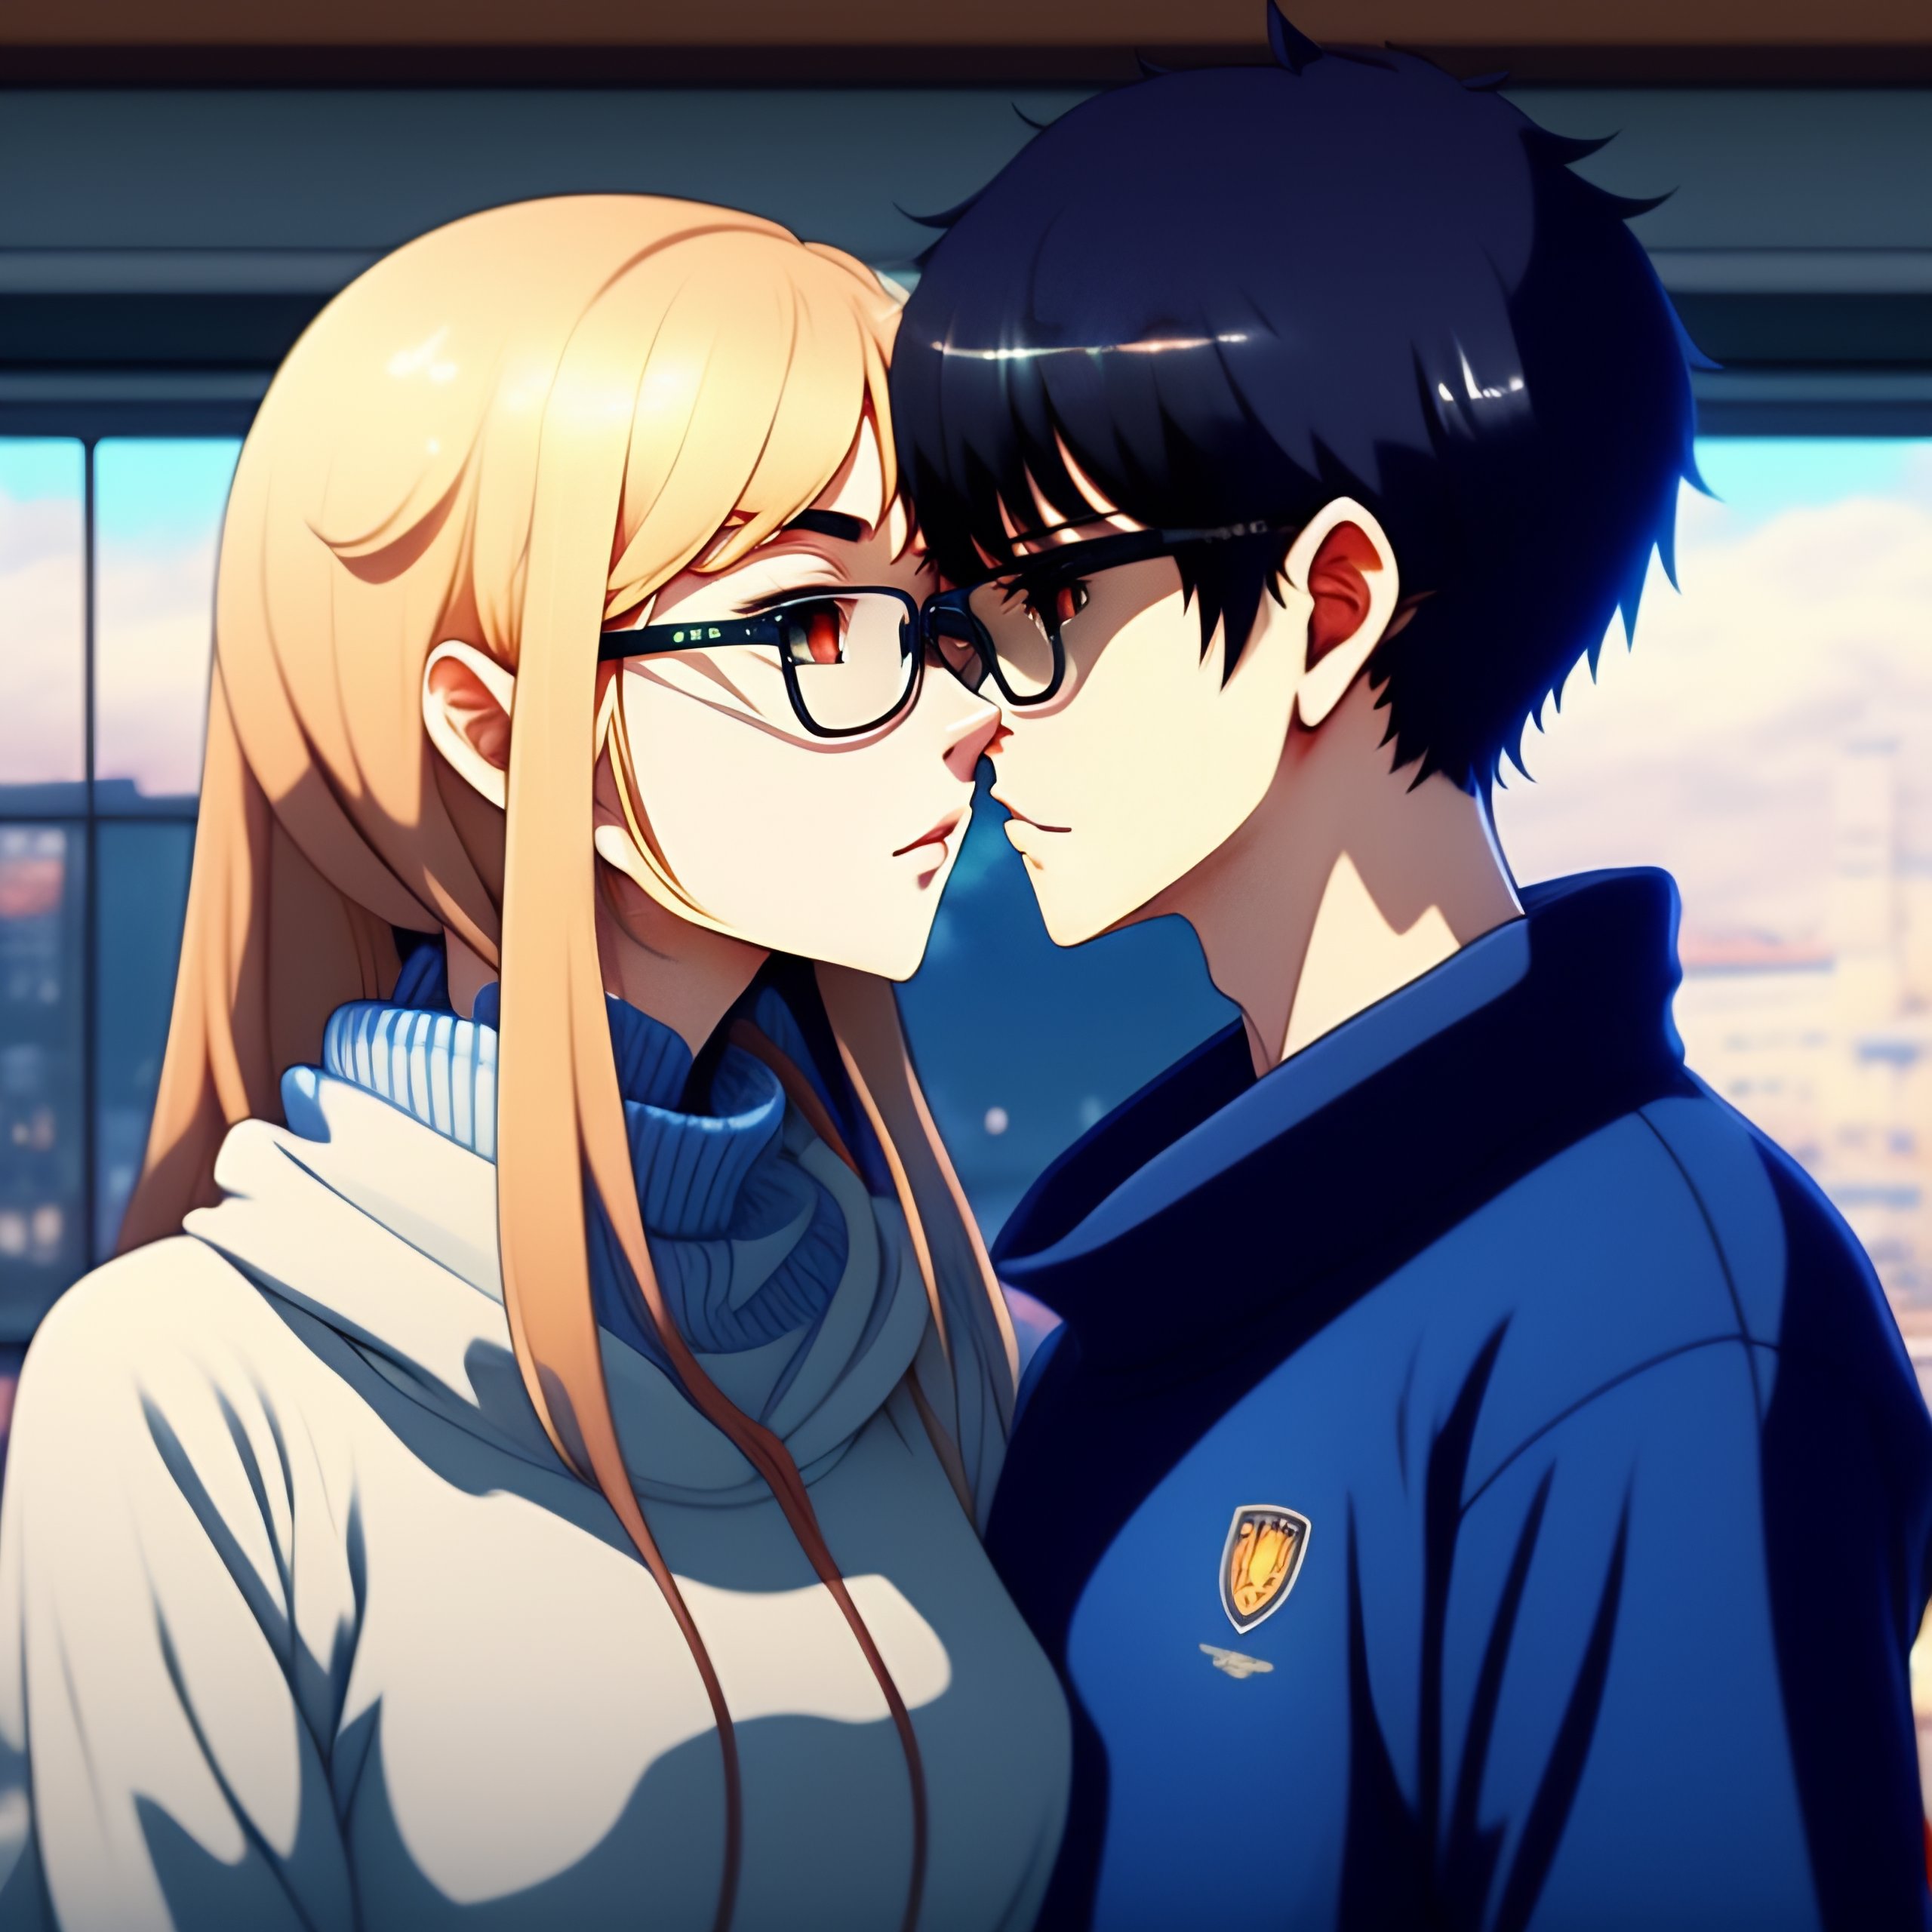 Lexica - Girl with glasses kissing her girlfriend, ghibli, anime style